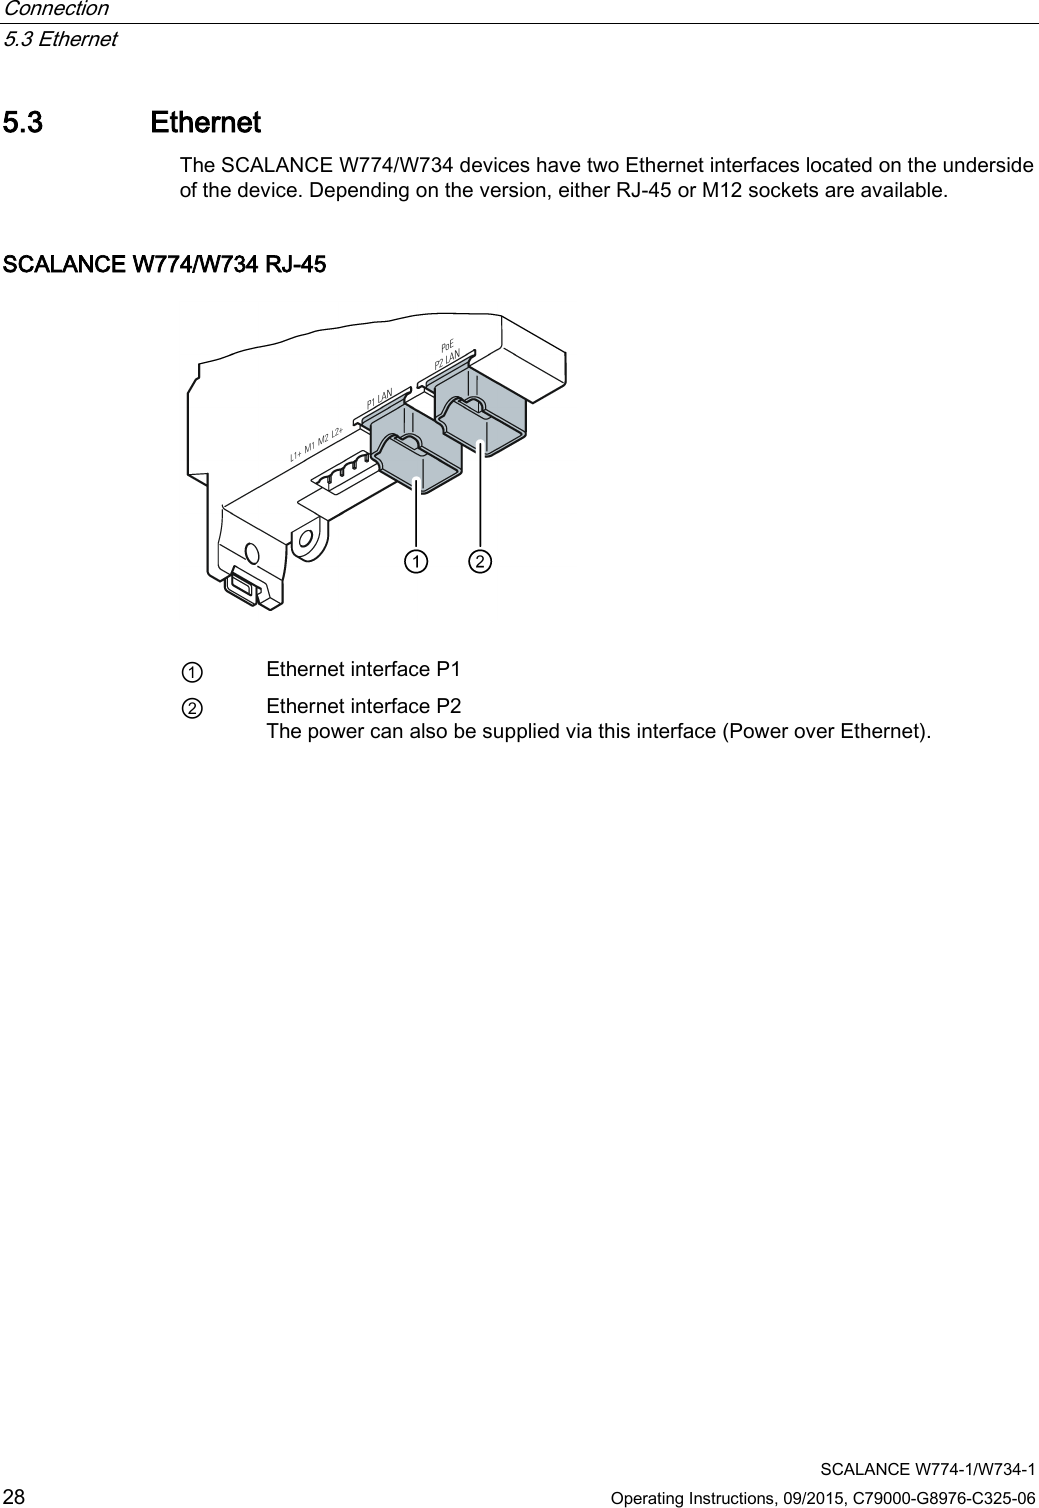 Connection   5.3 Ethernet  SCALANCE W774-1/W734-1 28 Operating Instructions, 09/2015, C79000-G8976-C325-06 5.3 Ethernet The SCALANCE W774/W734 devices have two Ethernet interfaces located on the underside of the device. Depending on the version, either RJ-45 or M12 sockets are available. SCALANCE W774/W734 RJ-45   ① Ethernet interface P1 ② Ethernet interface P2 The power can also be supplied via this interface (Power over Ethernet). 